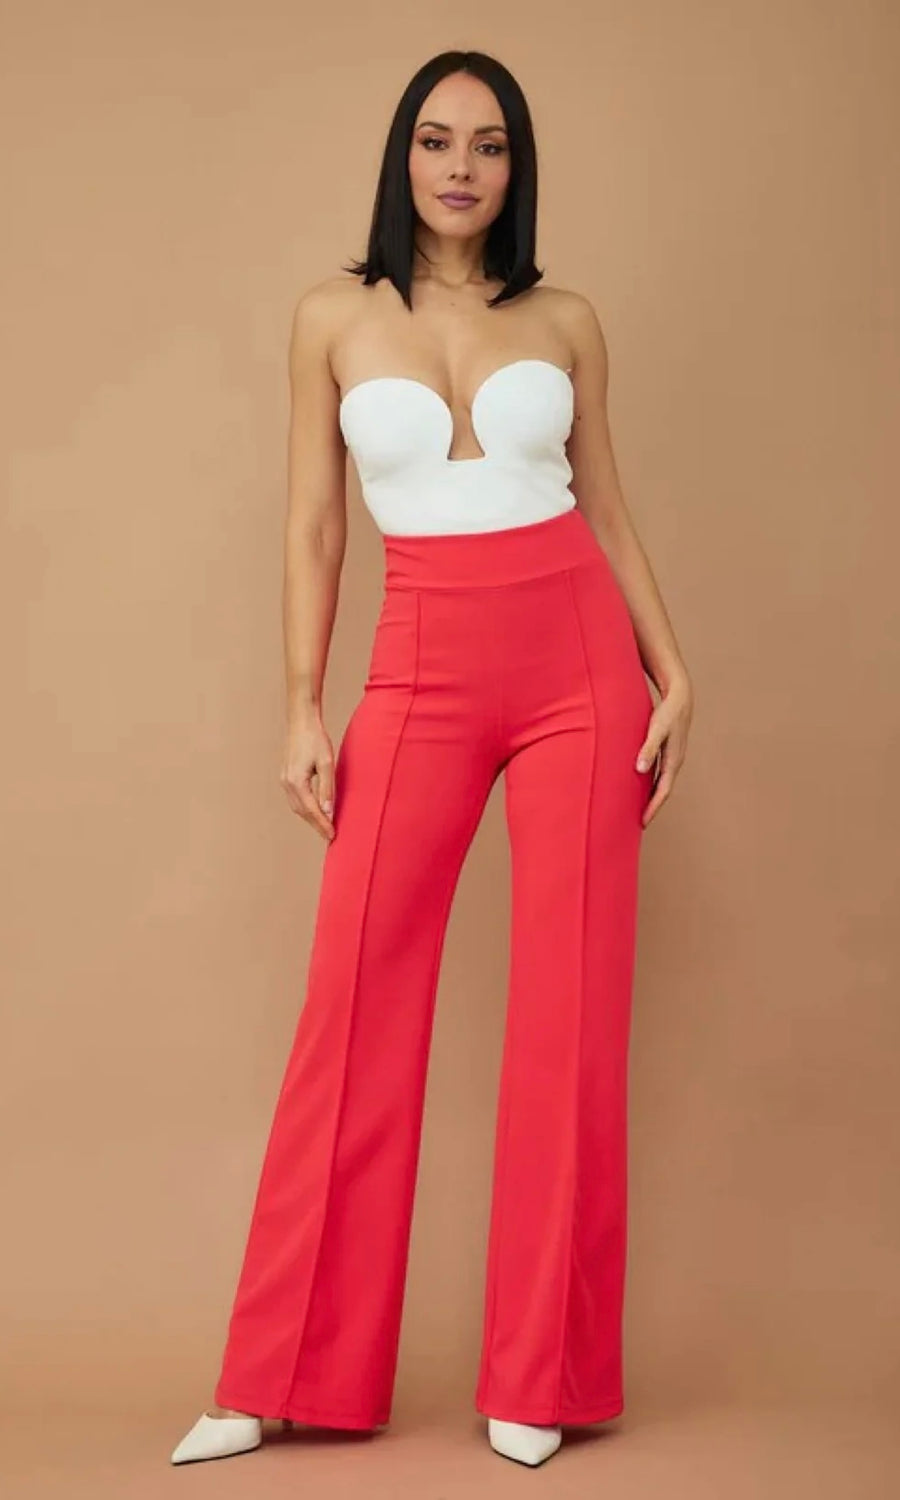 VERO CORAL PANTS - Add a Pop of Color to Your Wardrobe